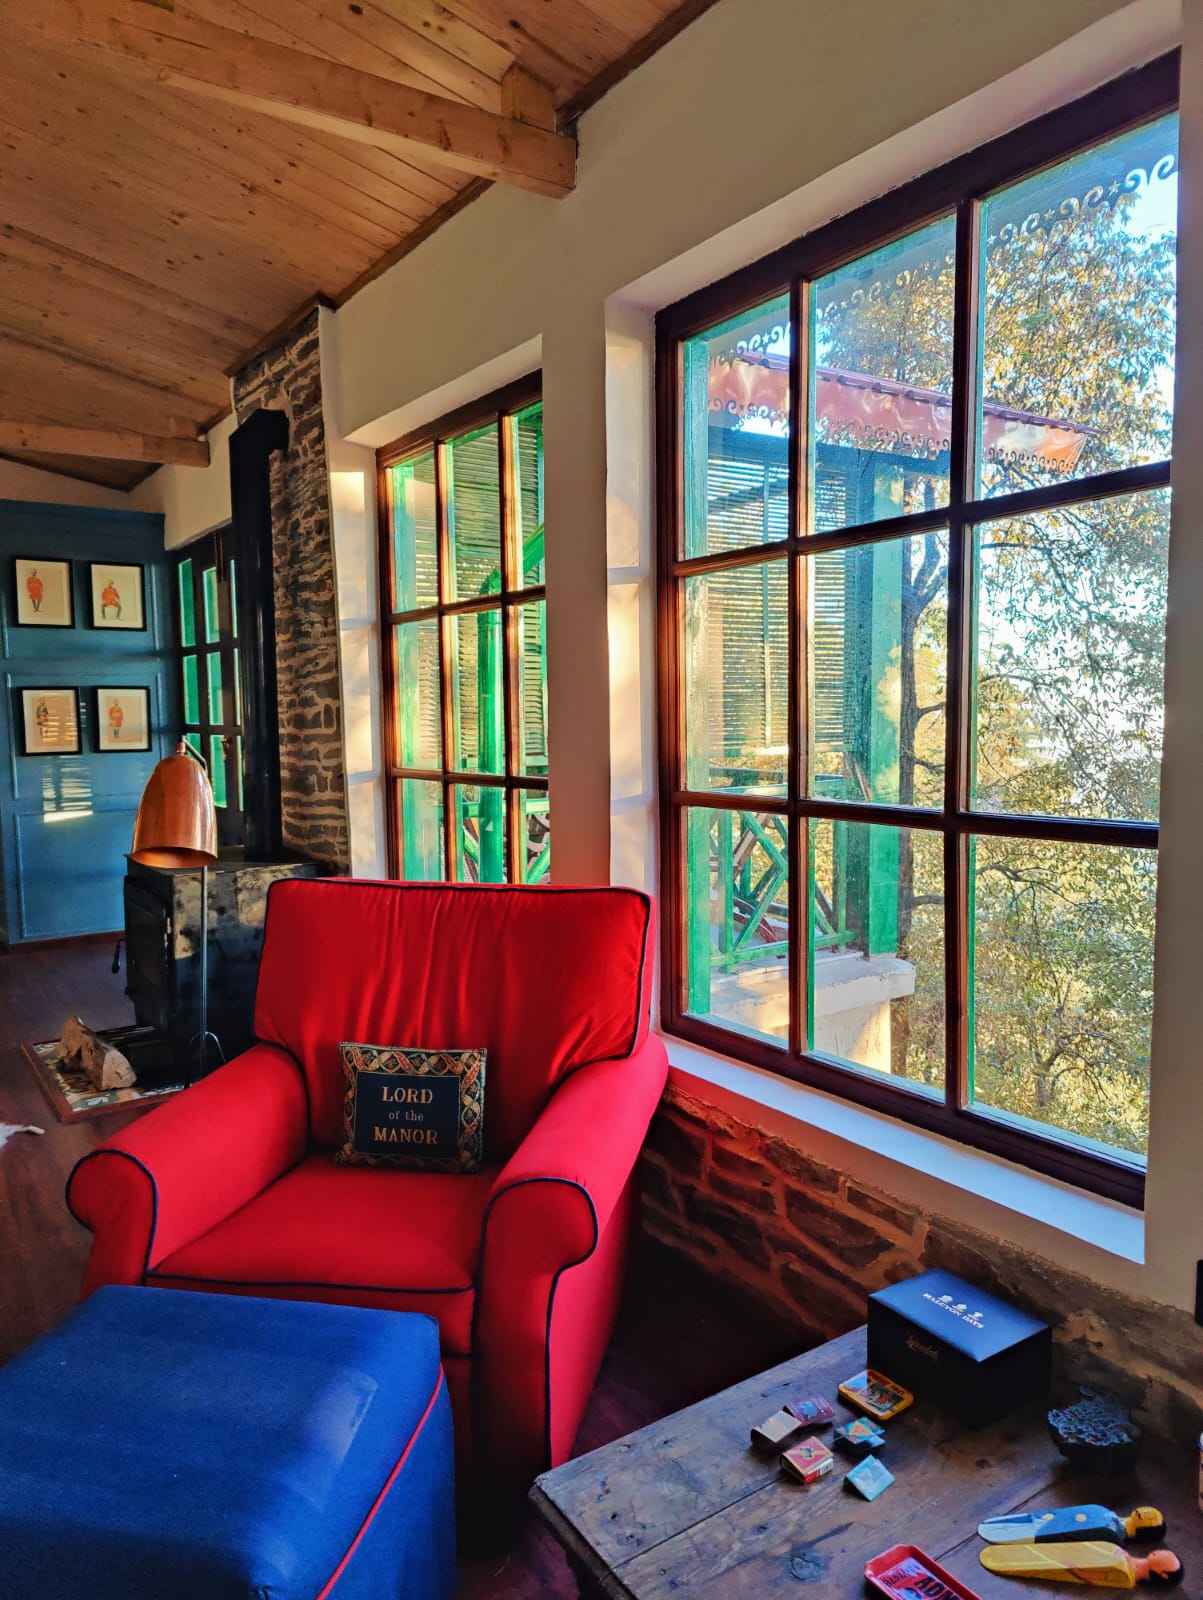 The Fern Cottage in Landour is a cosy escape for anyone looking to catch up on their latest book or write or paint